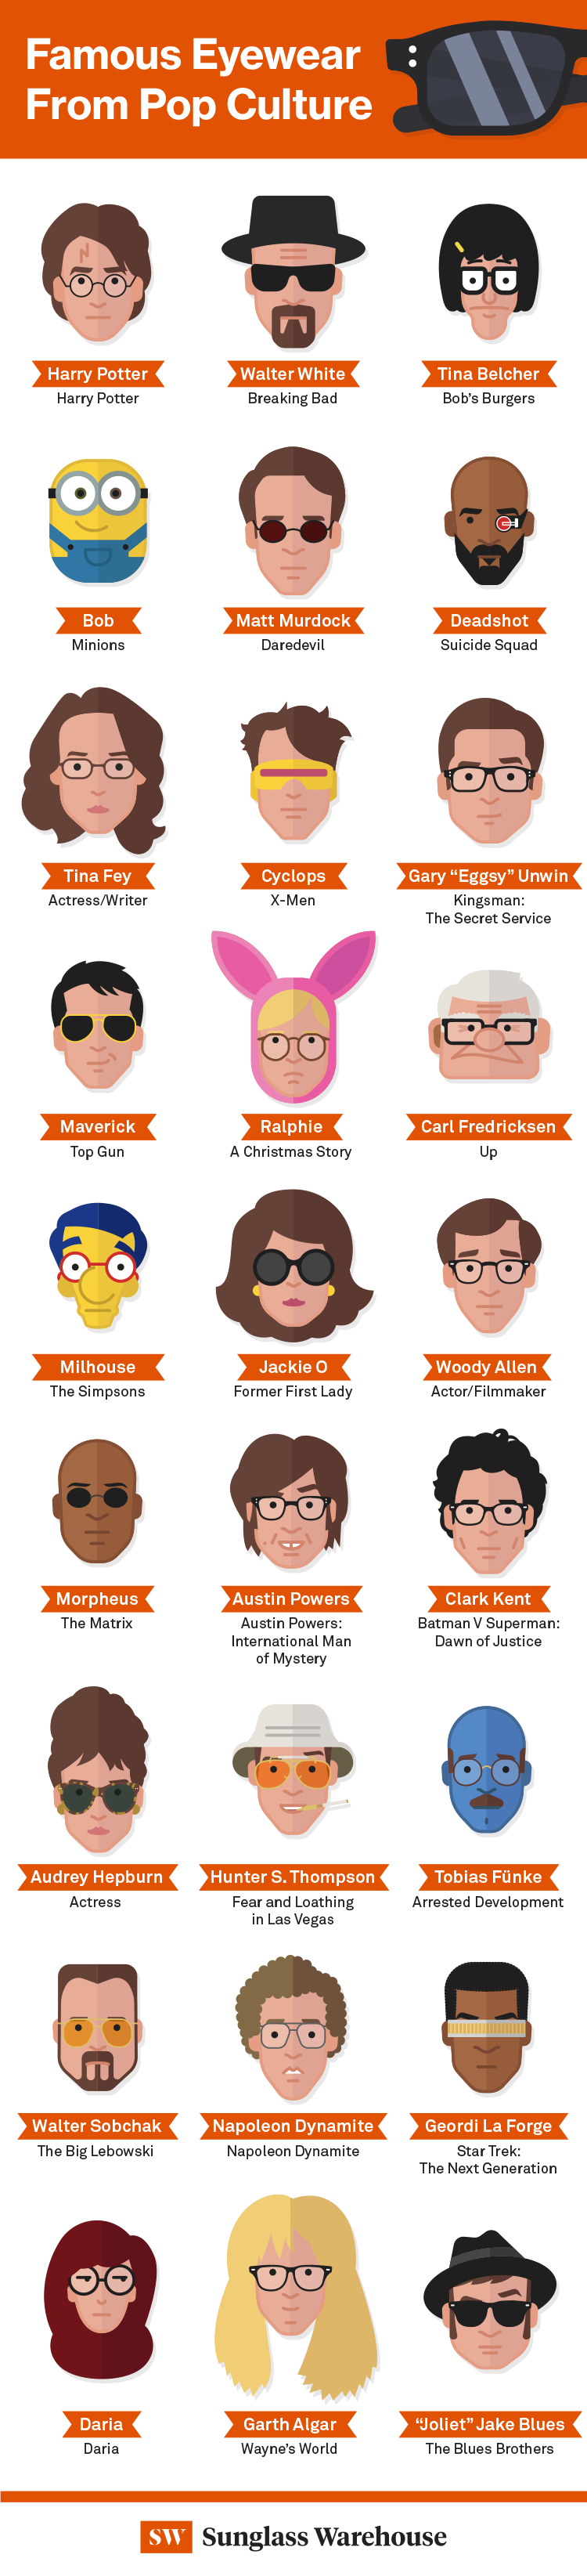 Famous Eyewear from Pop Culture [Infographic]